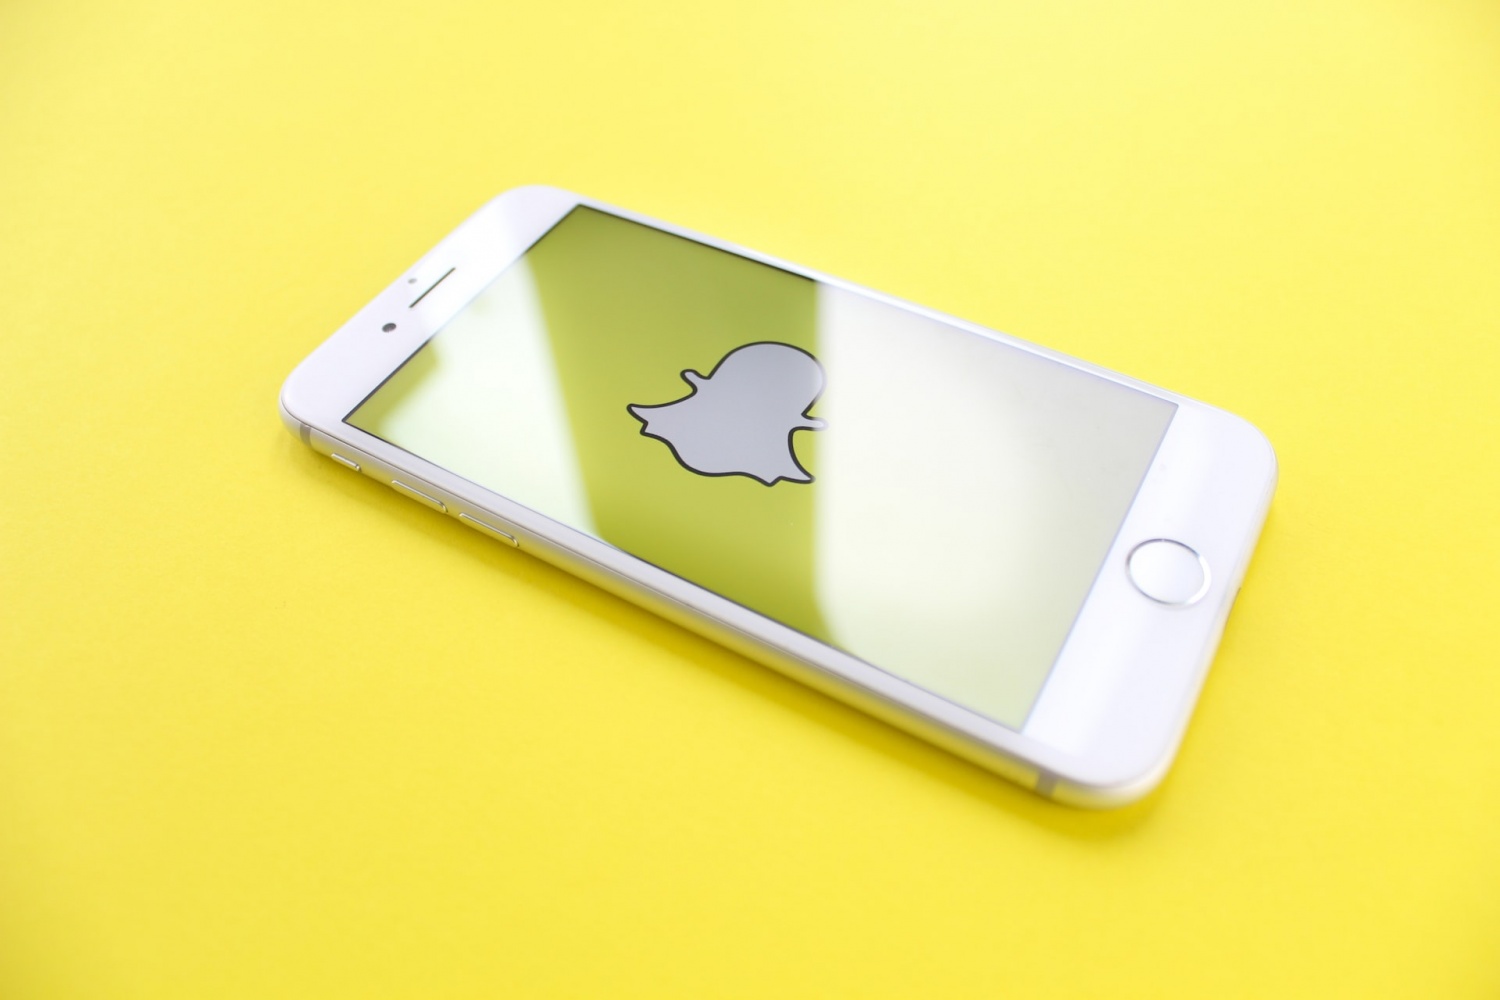 Snapchat+ Charges $3.99/Month and Gets Over 2 Million Paid Users